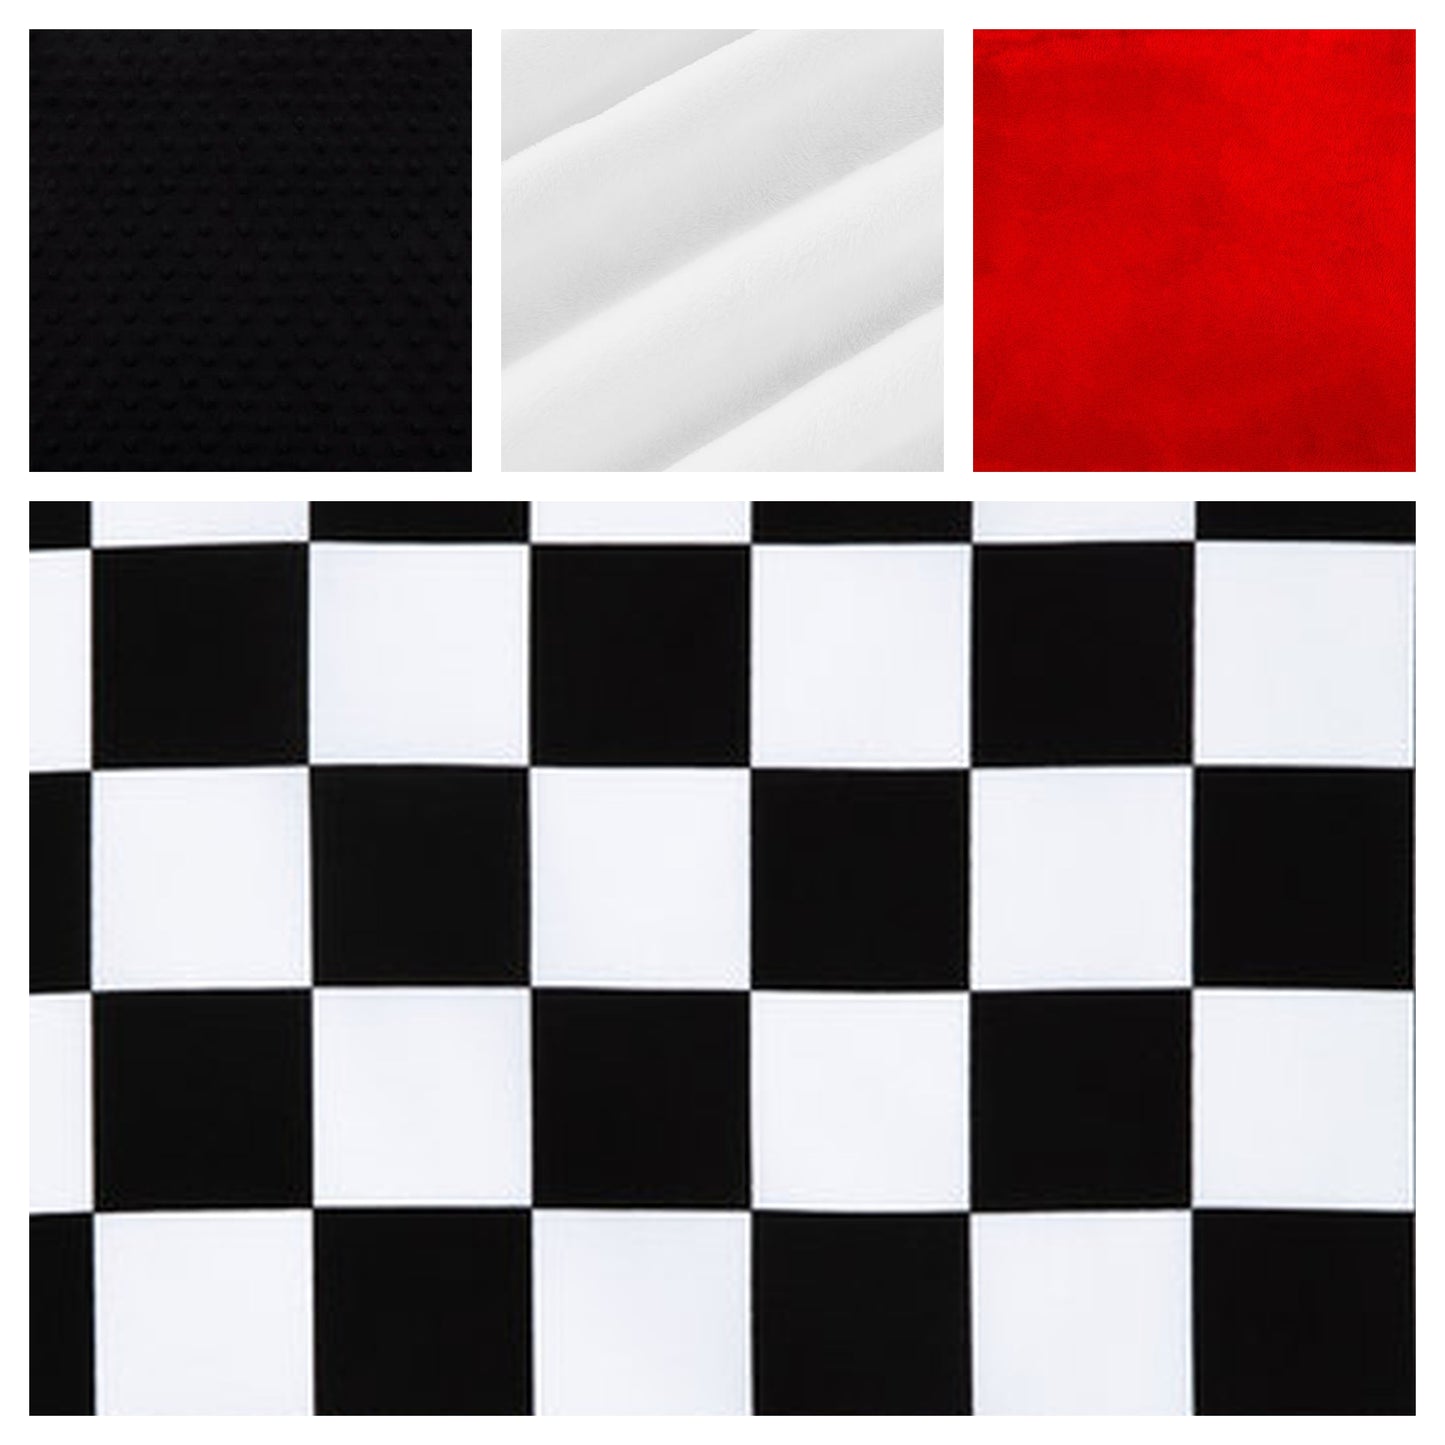 minky colors available for the back of the blanket - black, red or white